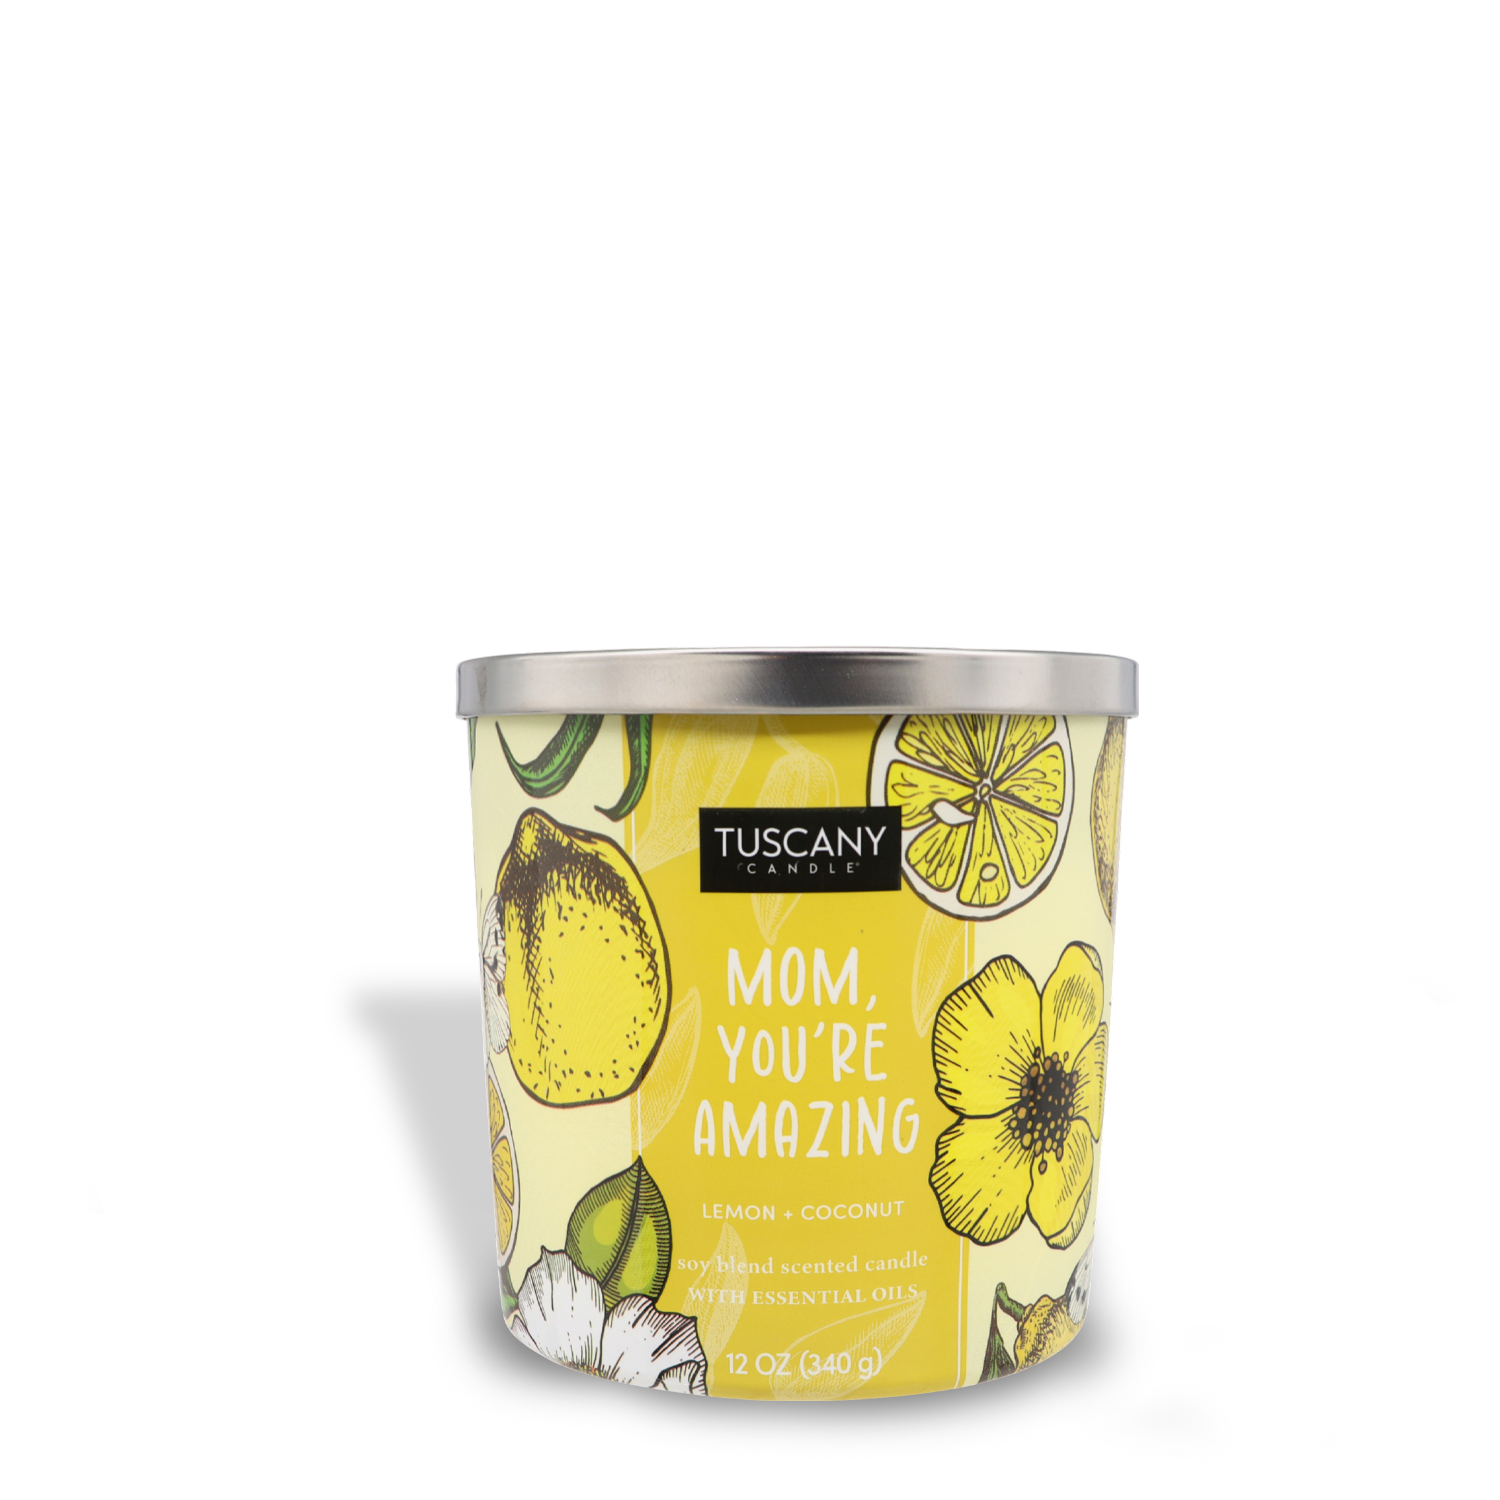 A candle labeled "Tuscany Candle® SEASONAL, Mom, You're Amazing (12 oz) – Mother's Day Collection, lemon + coconut" in a decorative container with lemon and flower illustrations.